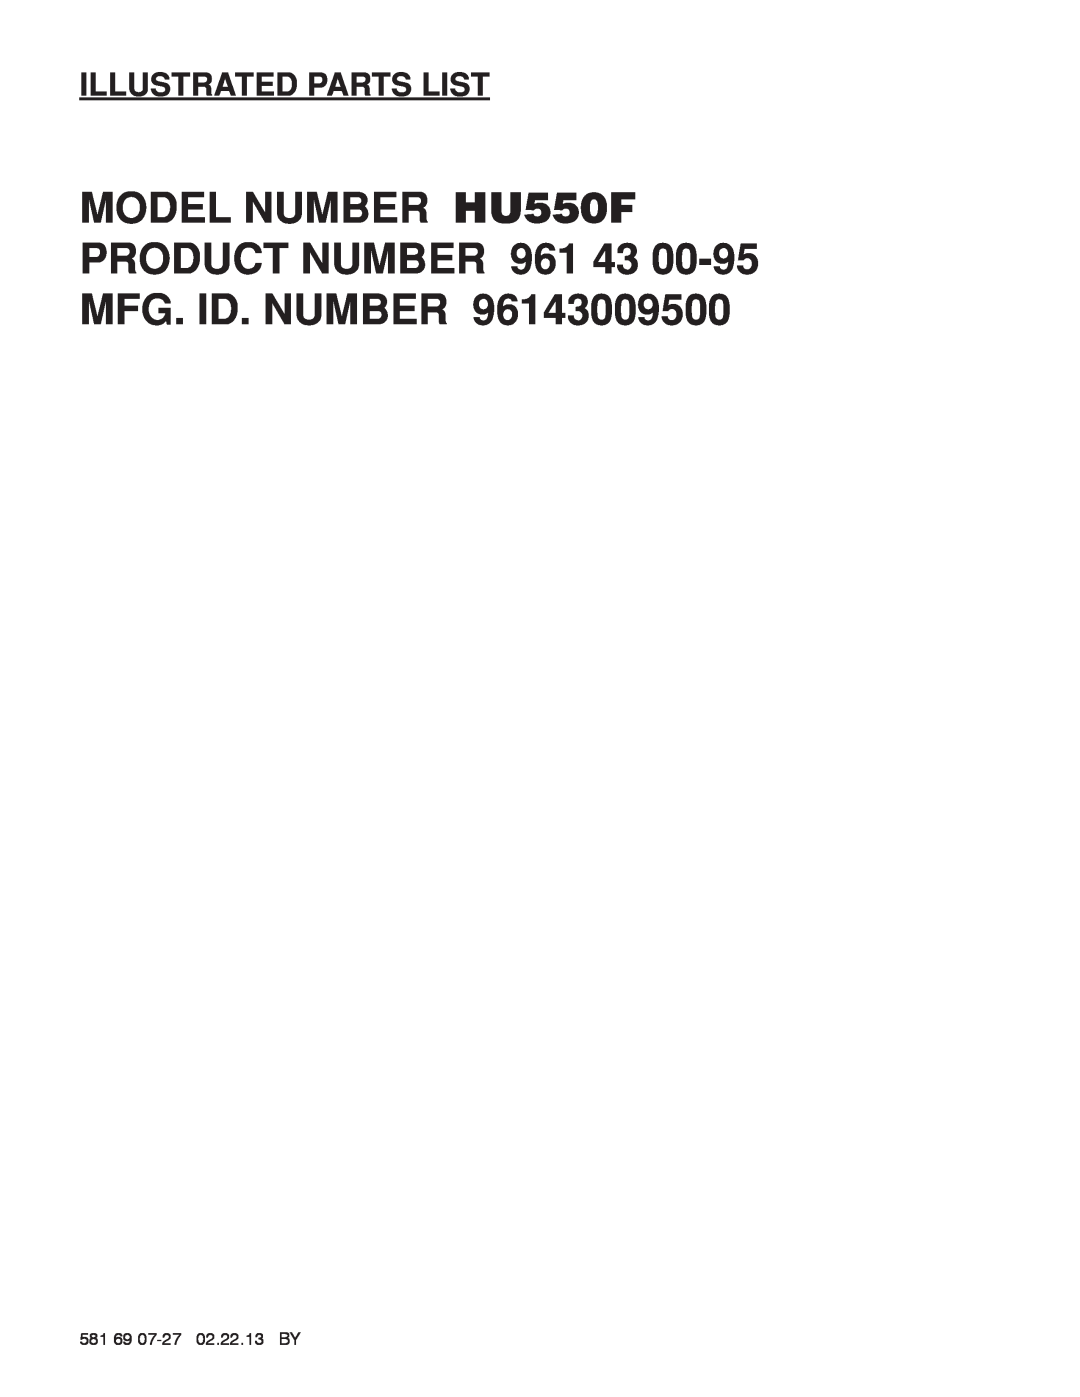 Husqvarna 961430095 manual 581 69 07-27 02.22.13 BY, MODEL NUMBER HU550F PRODUCT NUMBER 961 43 00-95 MFG. ID. NUMBER 